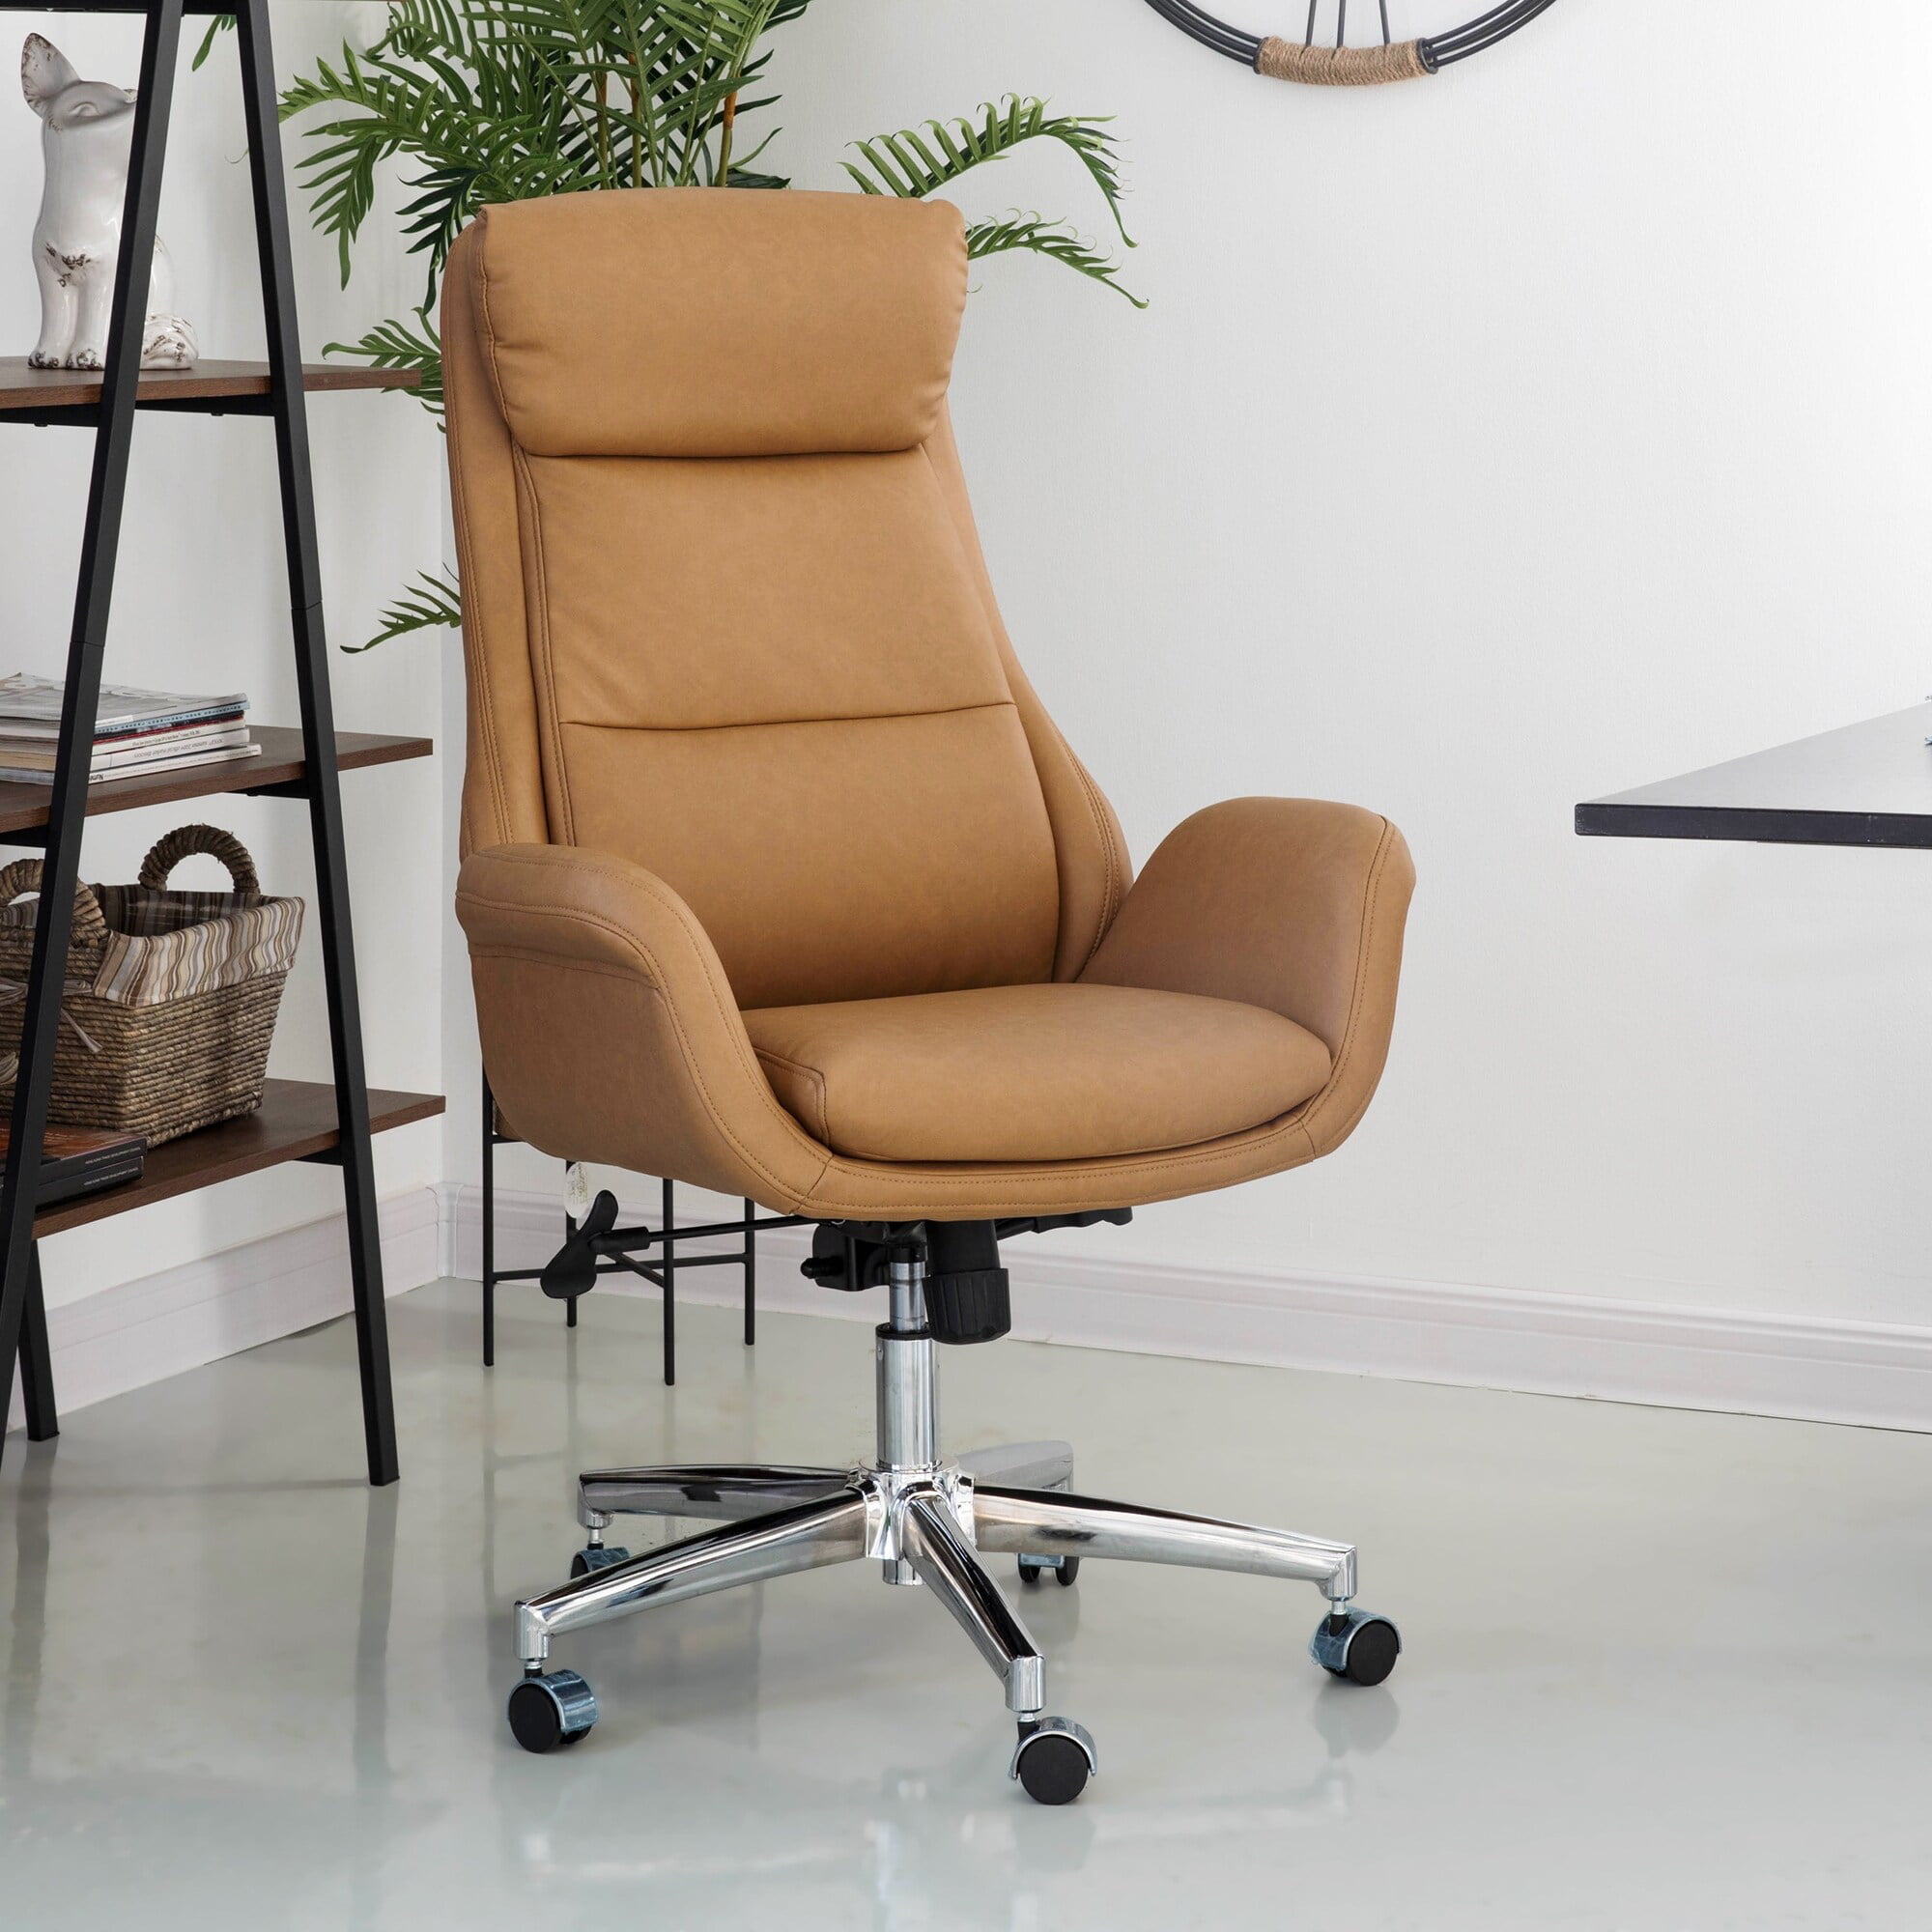 Glitzhome Mid-Century Modern Leatherette Adjustable Office Chair Camel